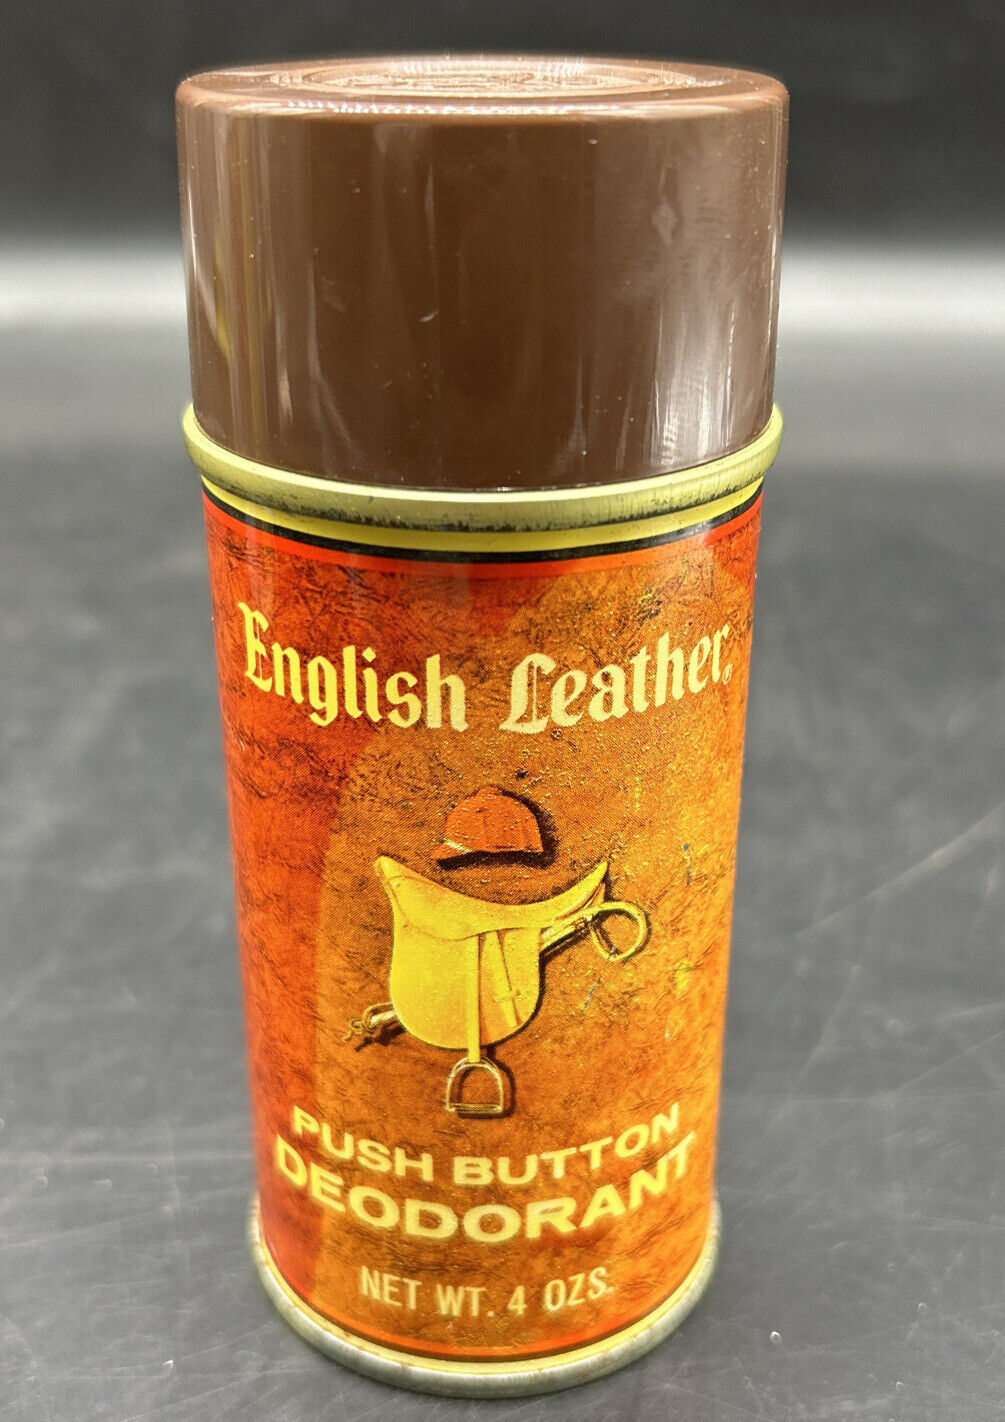 Vintage 1970s English Leather Push Button Deodorant NOS Full